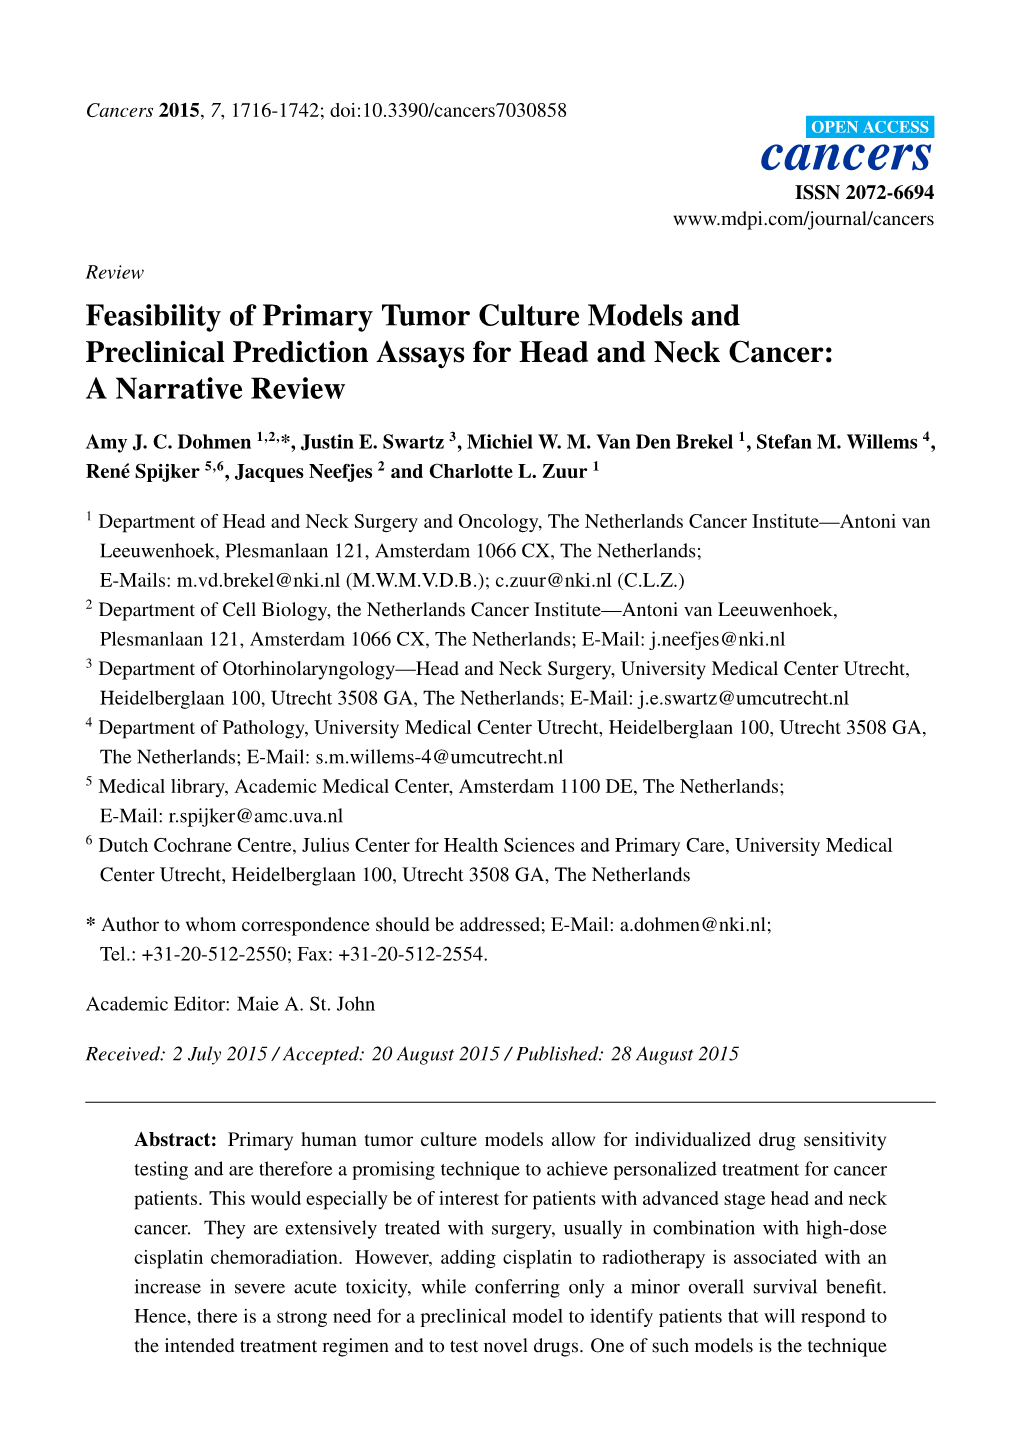 Feasibility of Primary Tumor Culture Models and Preclinical Prediction Assays for Head and Neck Cancer: a Narrative Review